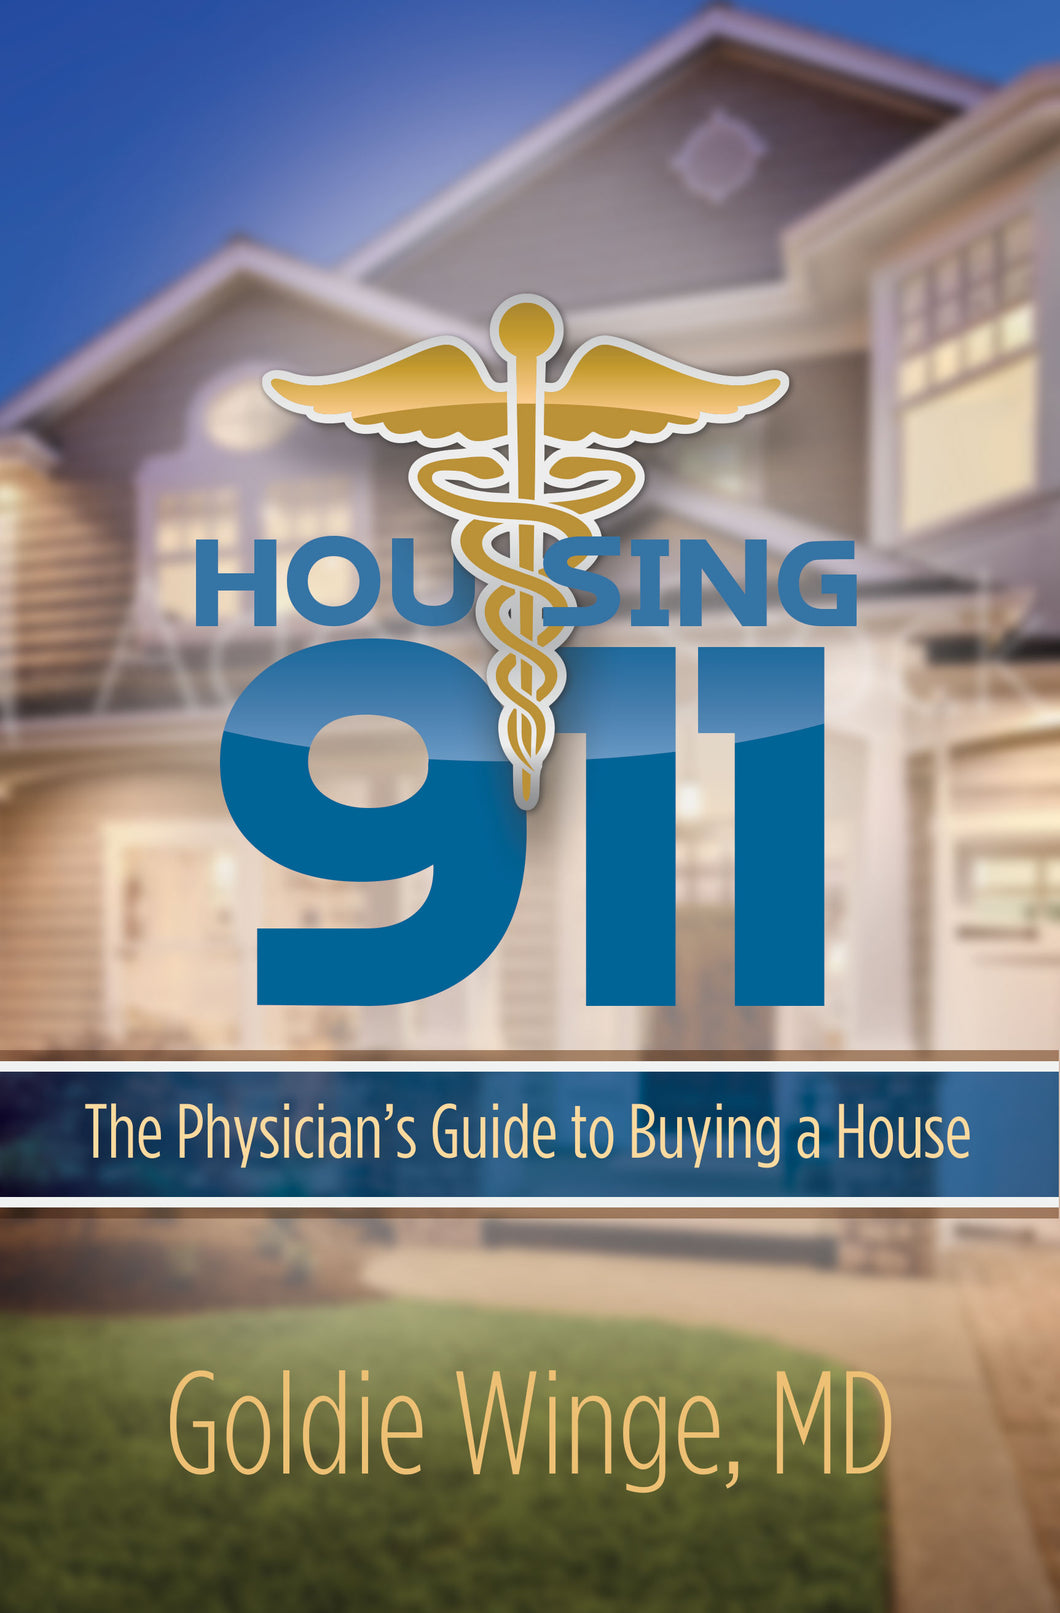 Housing 911: The Physician's Guide to Buying a House